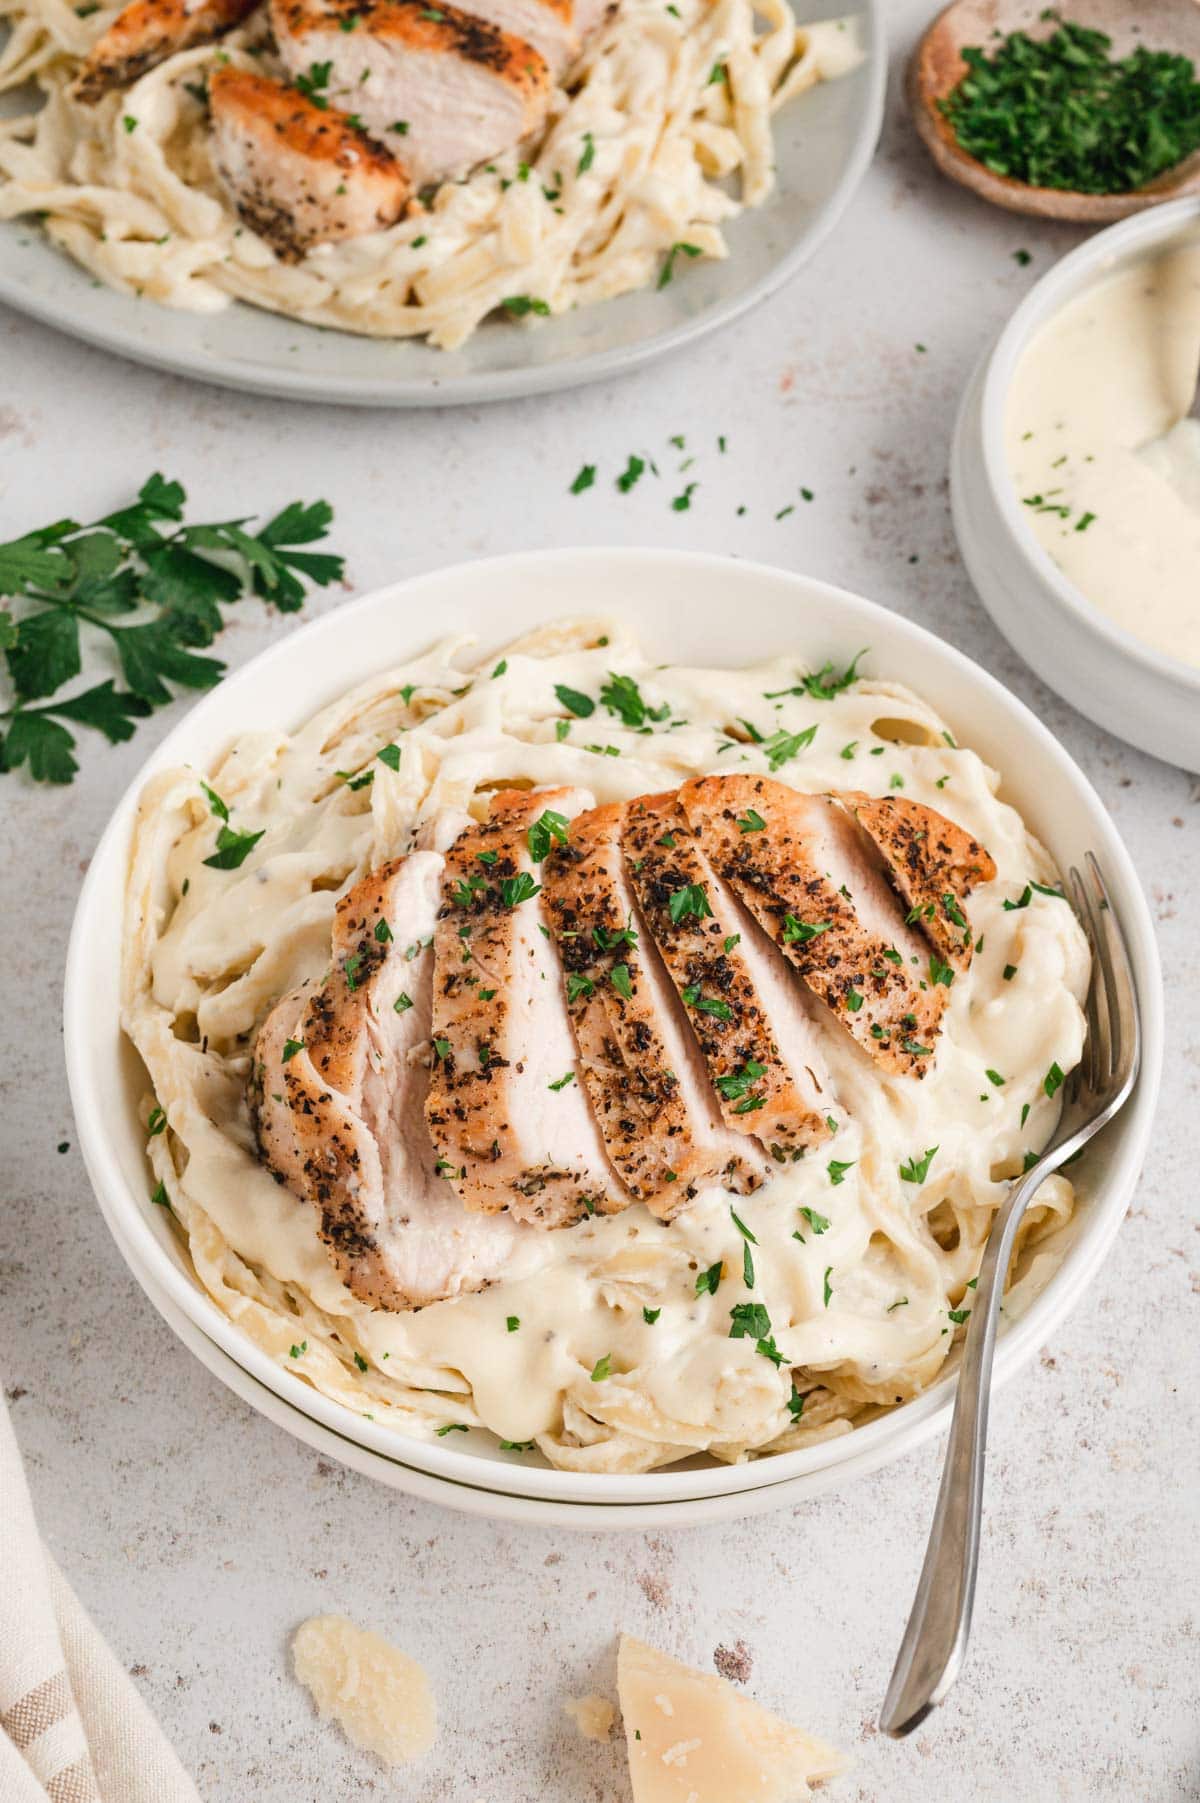 Fettuccine noodles with alfredo sauce and chicken in a serving bowl